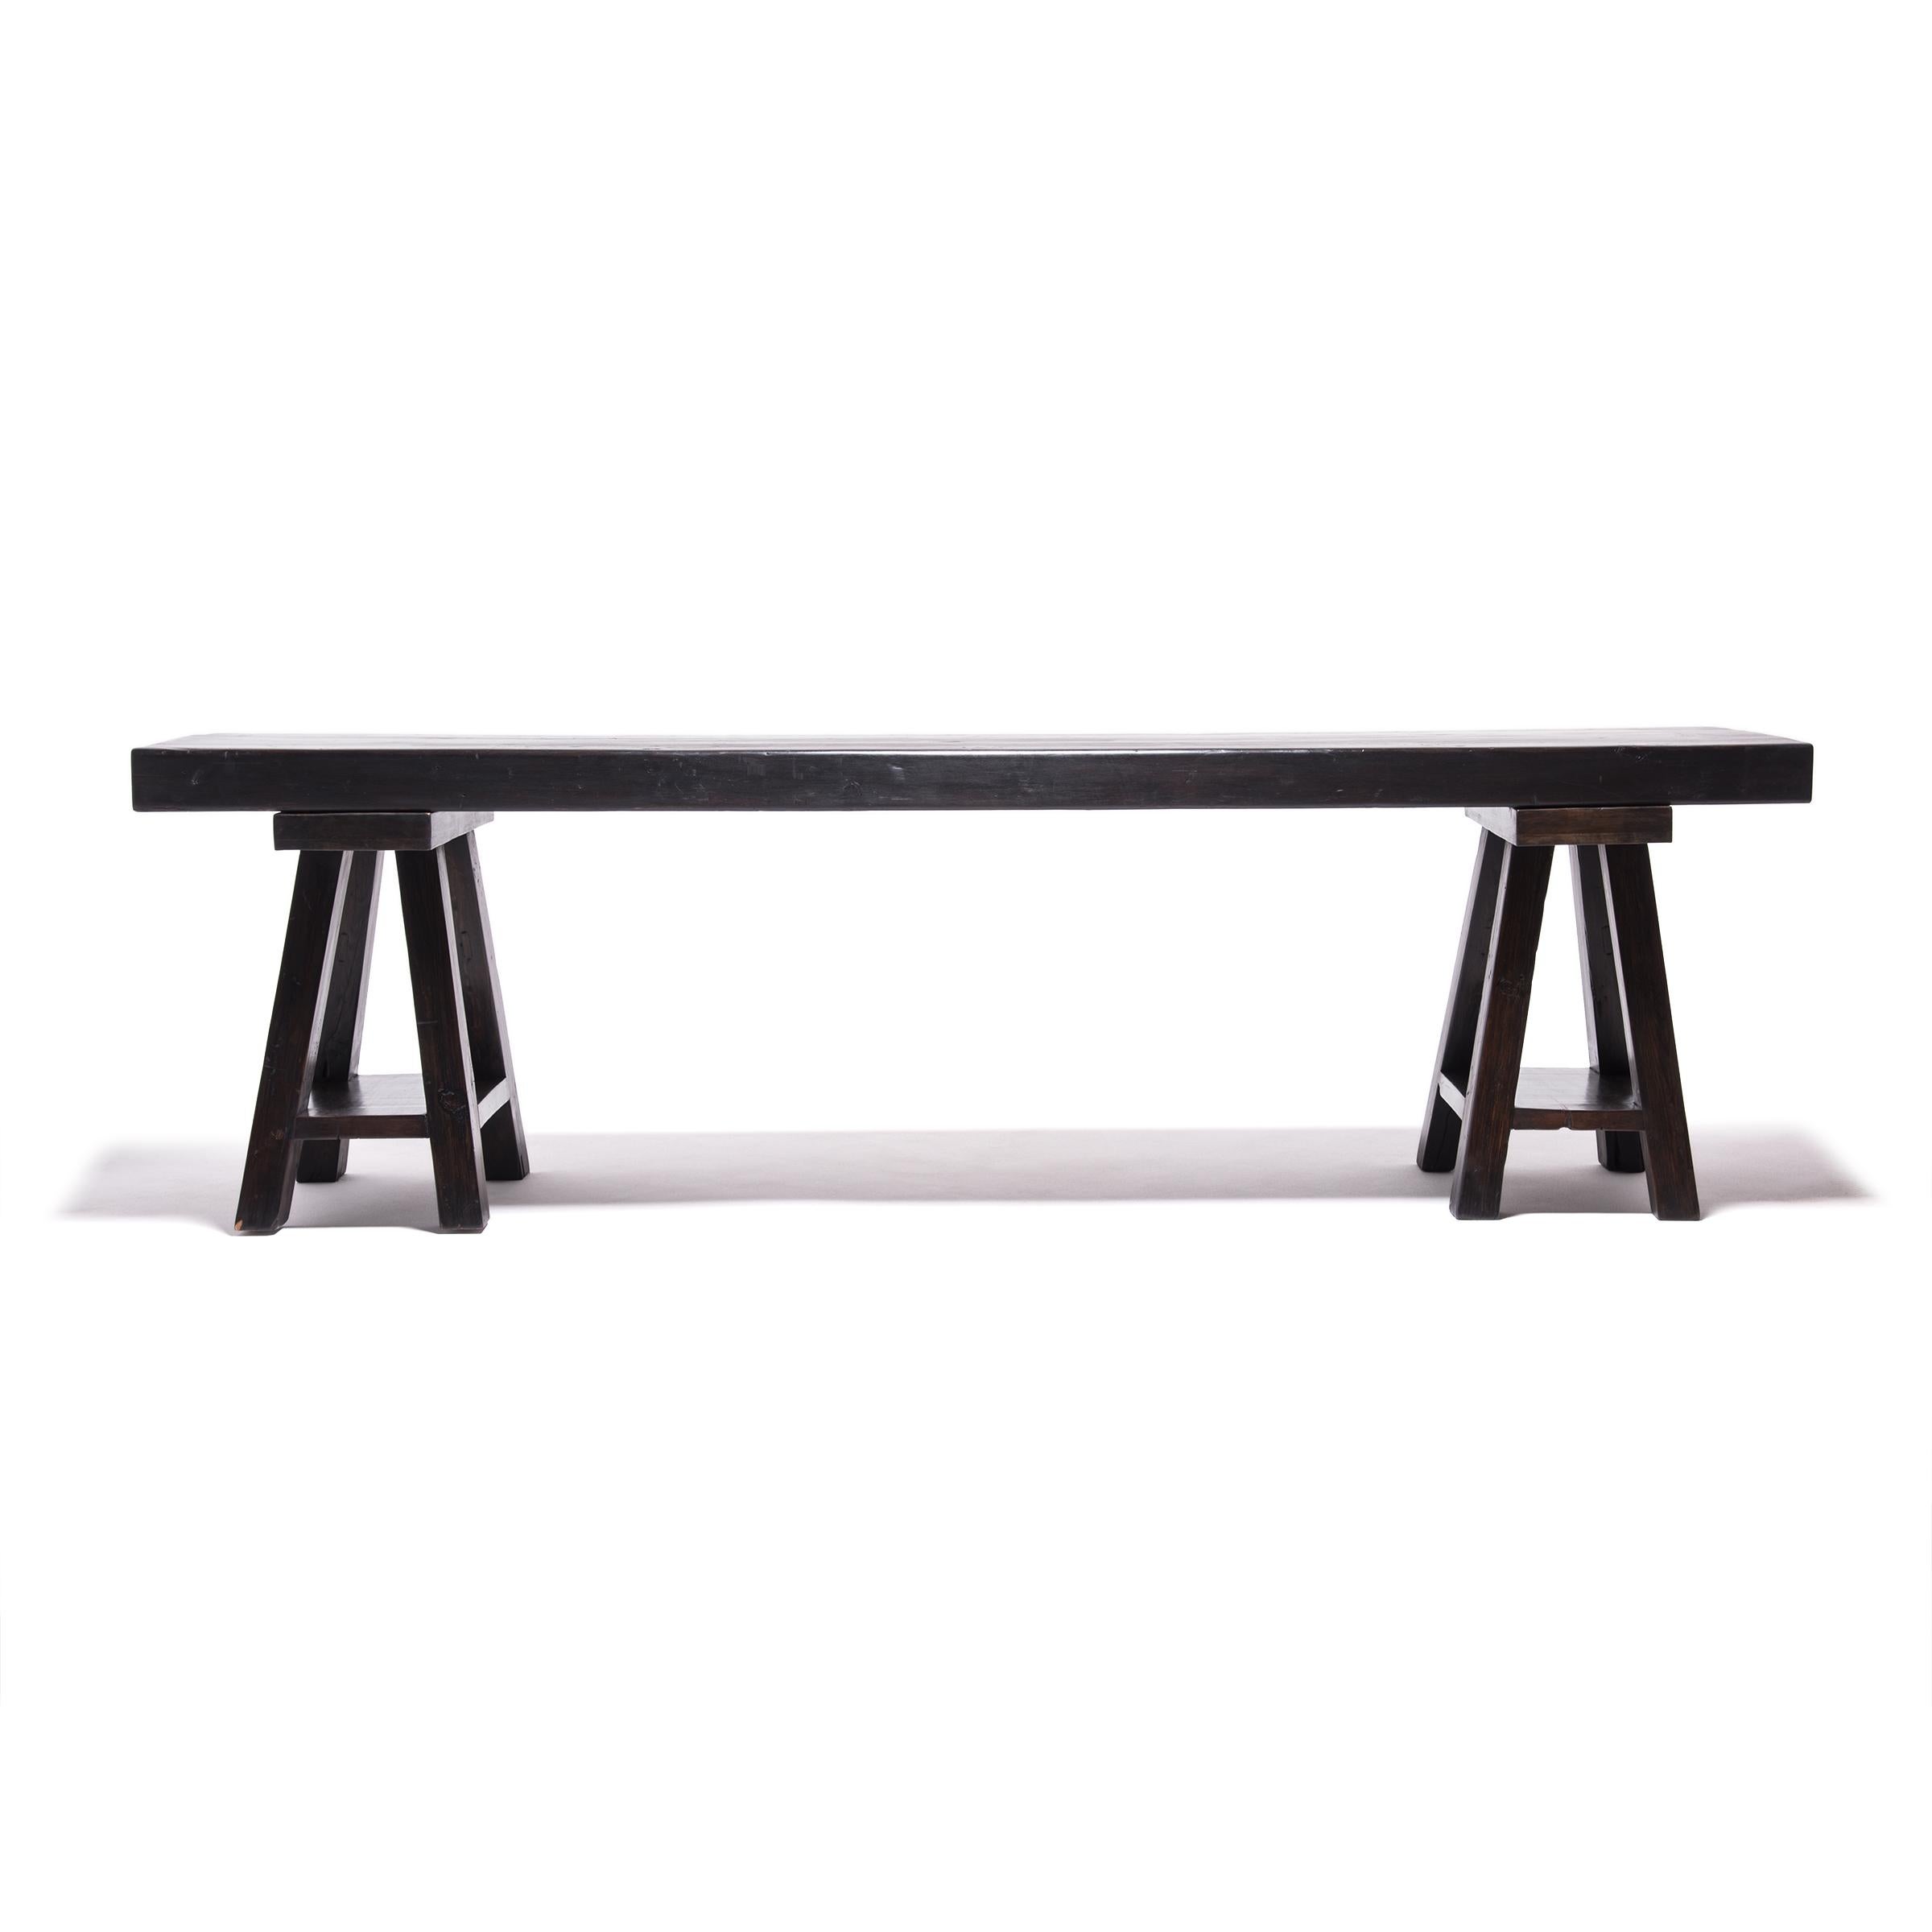 A long, narrow table such as this makes for an ideal workspace for contemplating Chinese scrolls and paintings. This Qing-dynasty table was made in northern China over a century ago, but the timeless, linear design fits effortlessly into the modern